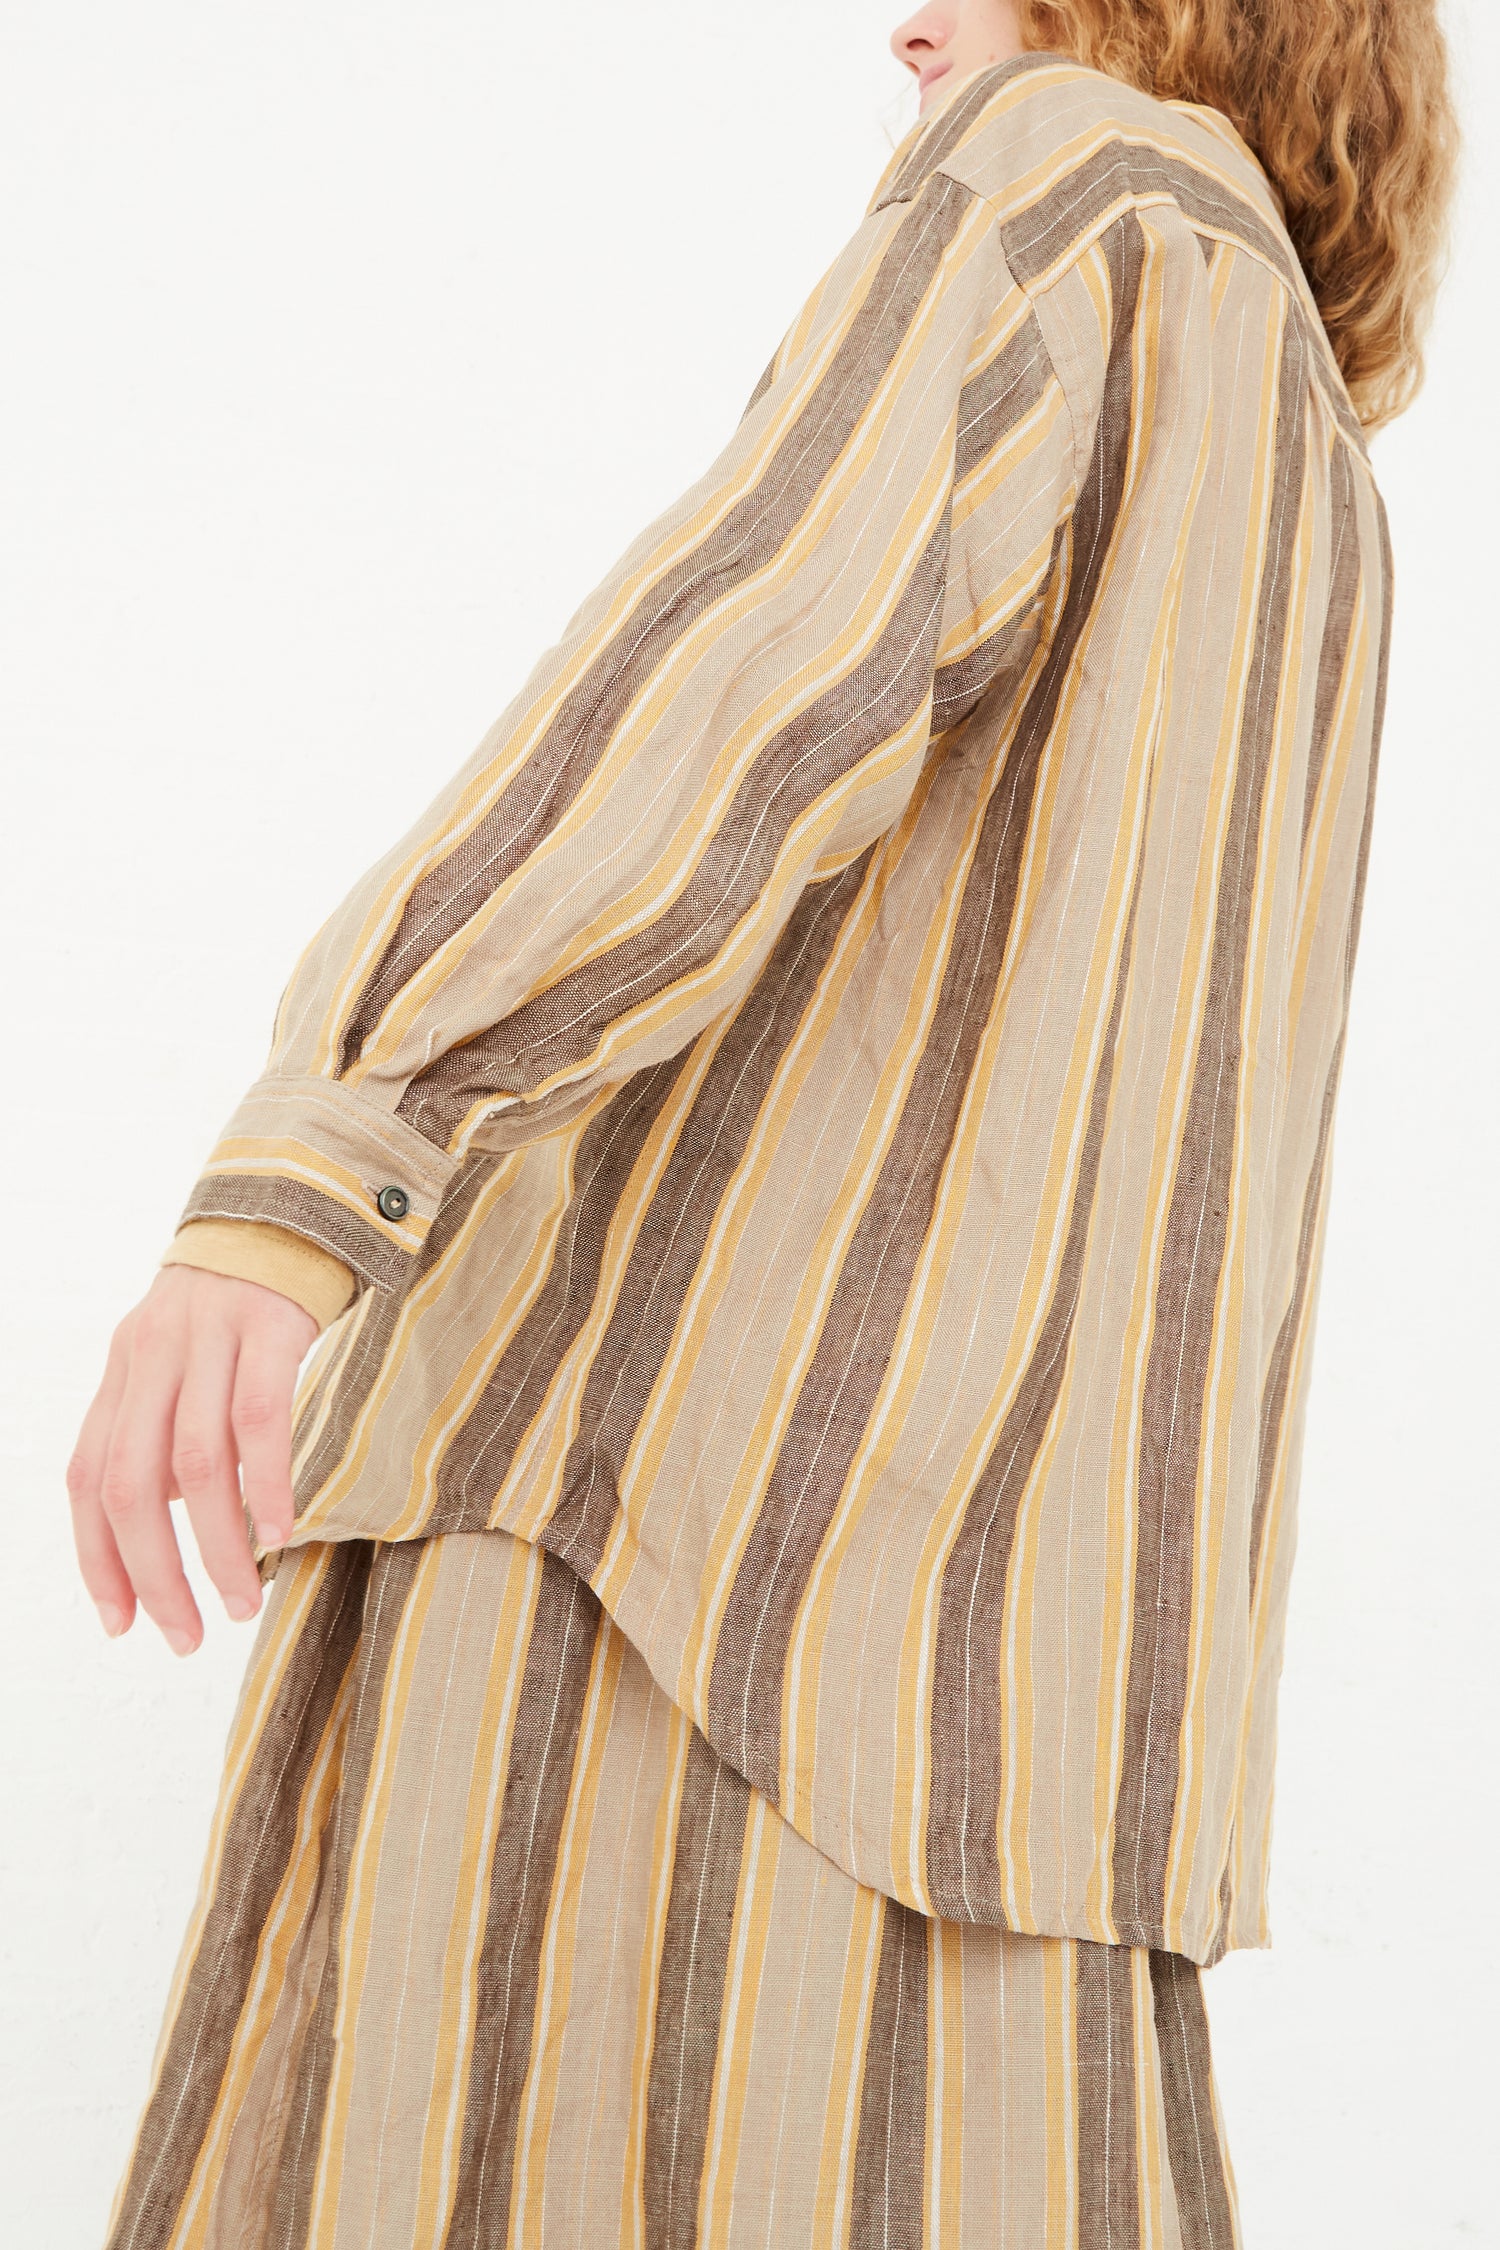 The back of a model wearing an Ichi Antiquités Linen Stripe Shirt in Mustard and skirt in a relaxed fit.